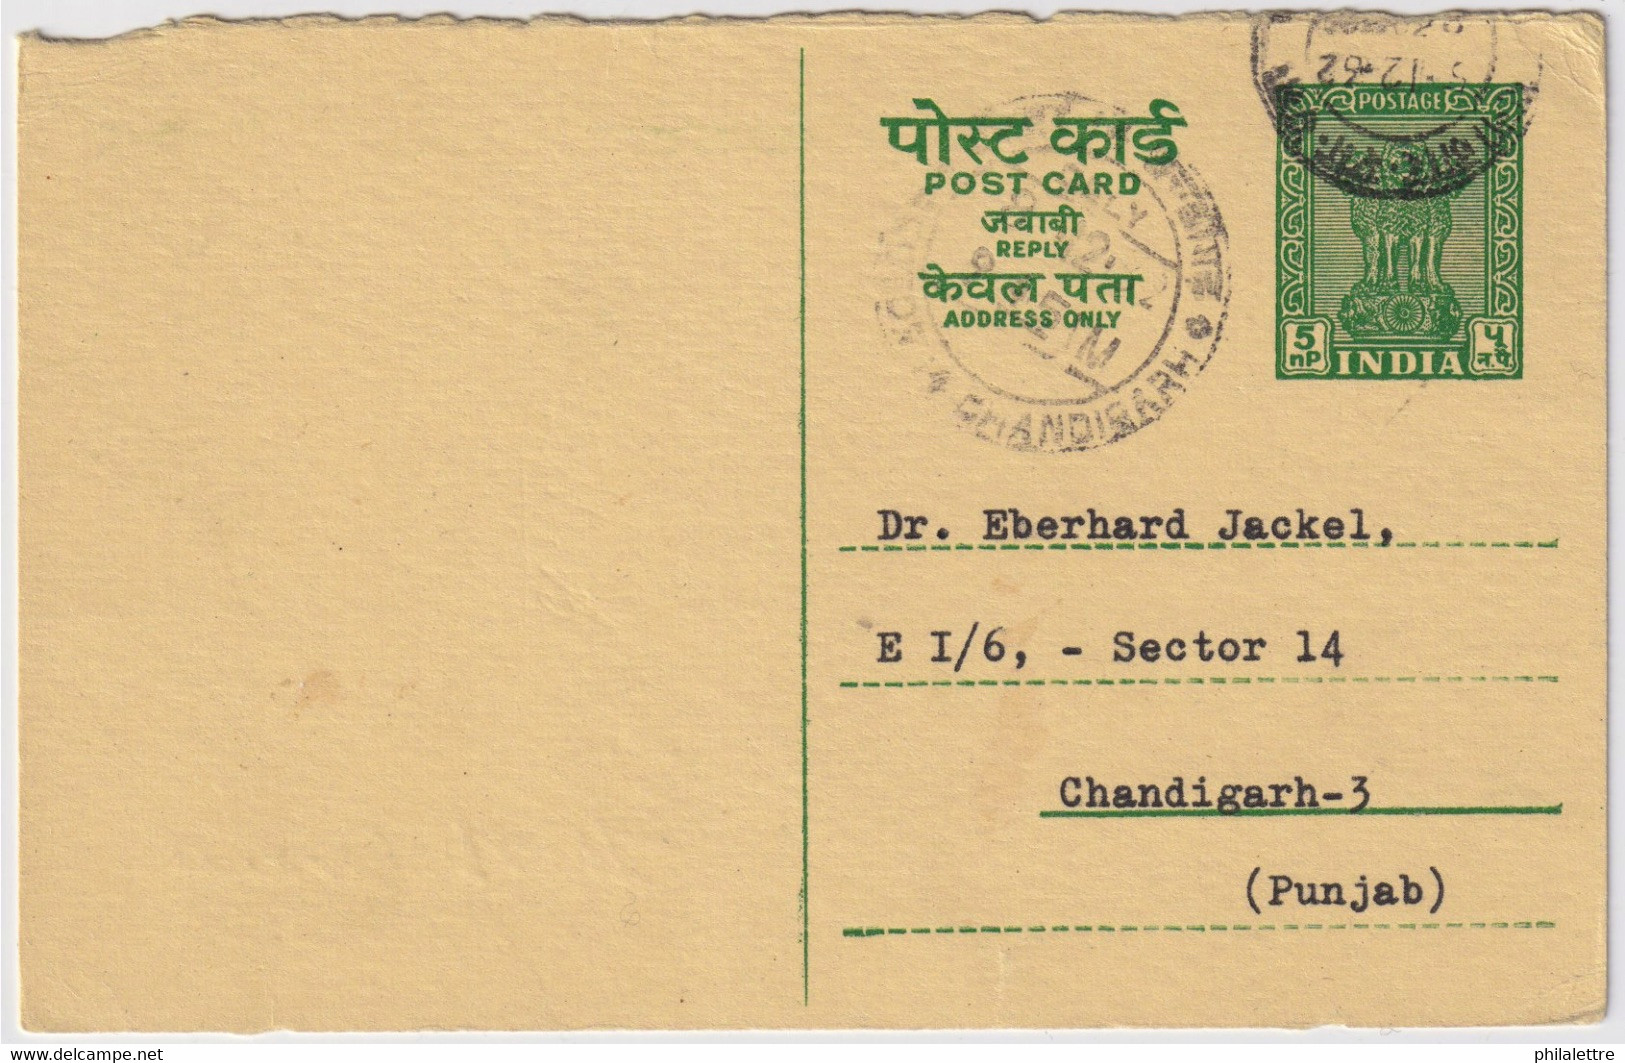 INDE / INDIA - 1962 - Fine Postal Card Used Locally In CHANDIGARH - Cartes Postales